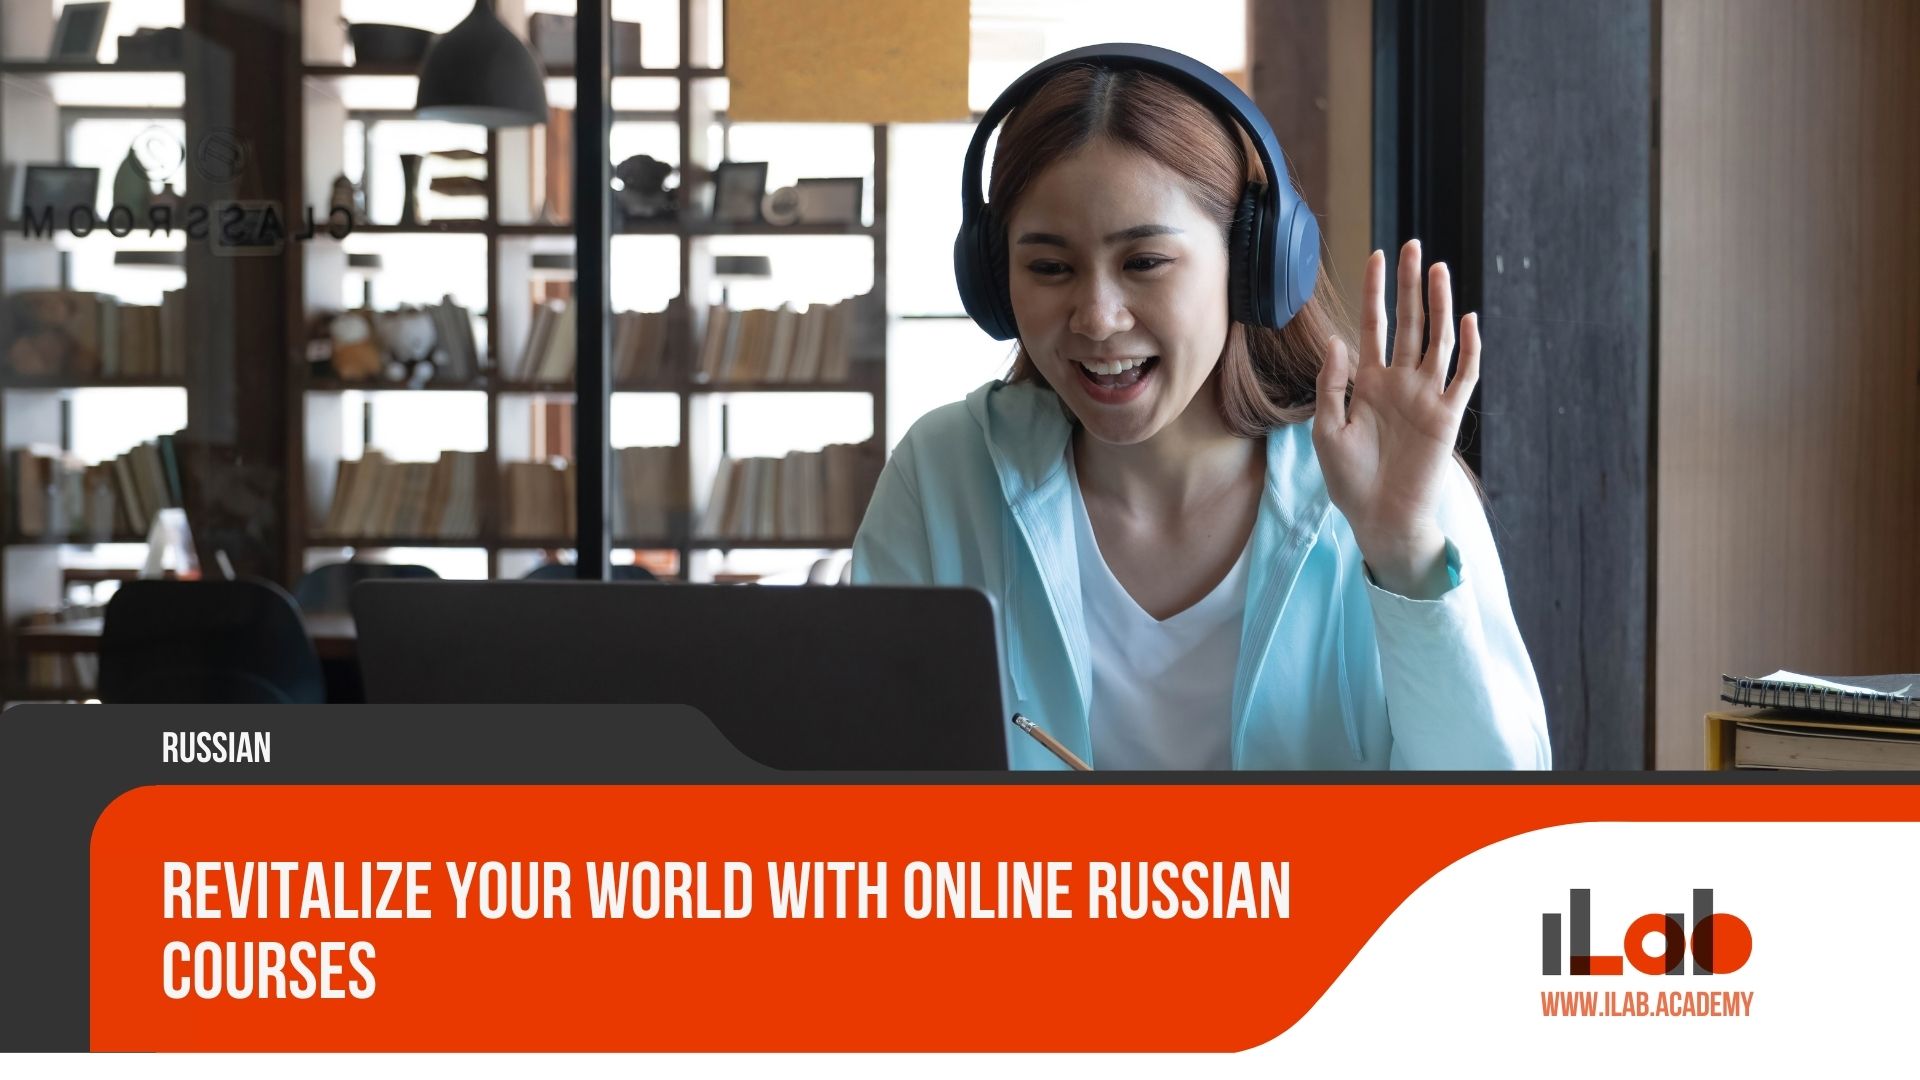 Revitalize Your World With Online Russian Courses